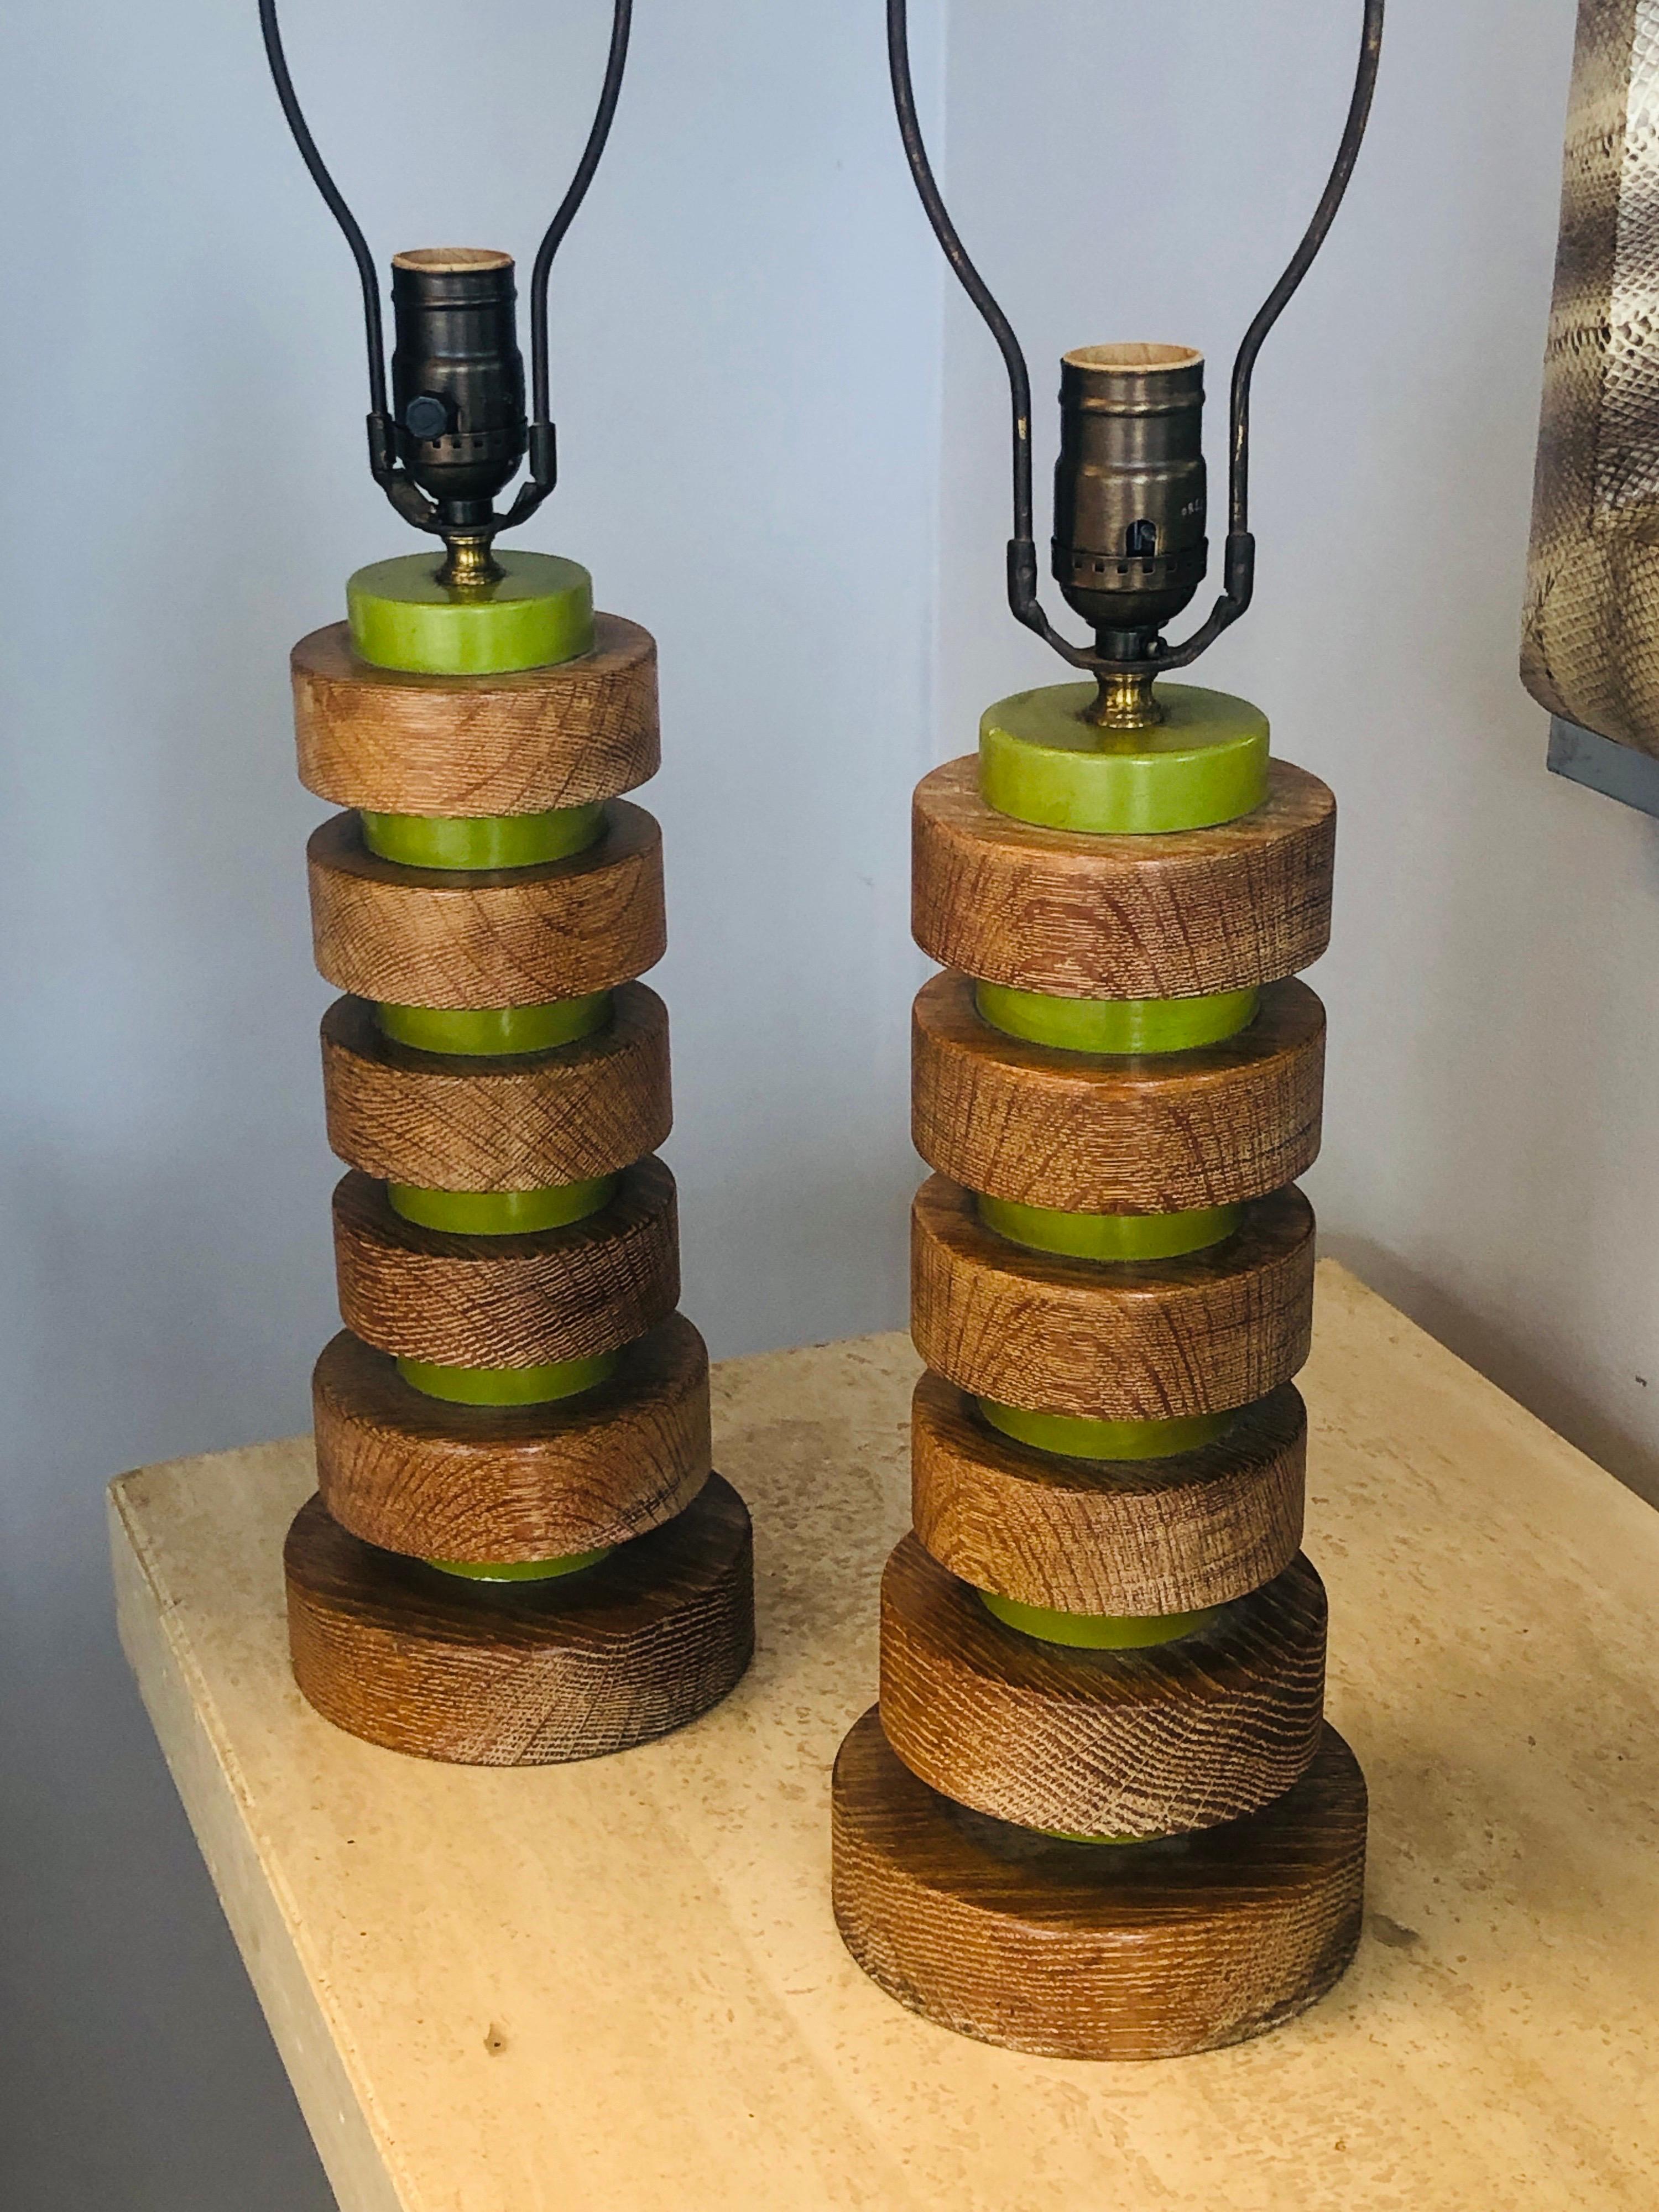 A pair of period lamps. Most probably a Paul Frankl design or in his style.
Thick concentric oak disks are interlocked with green ones.